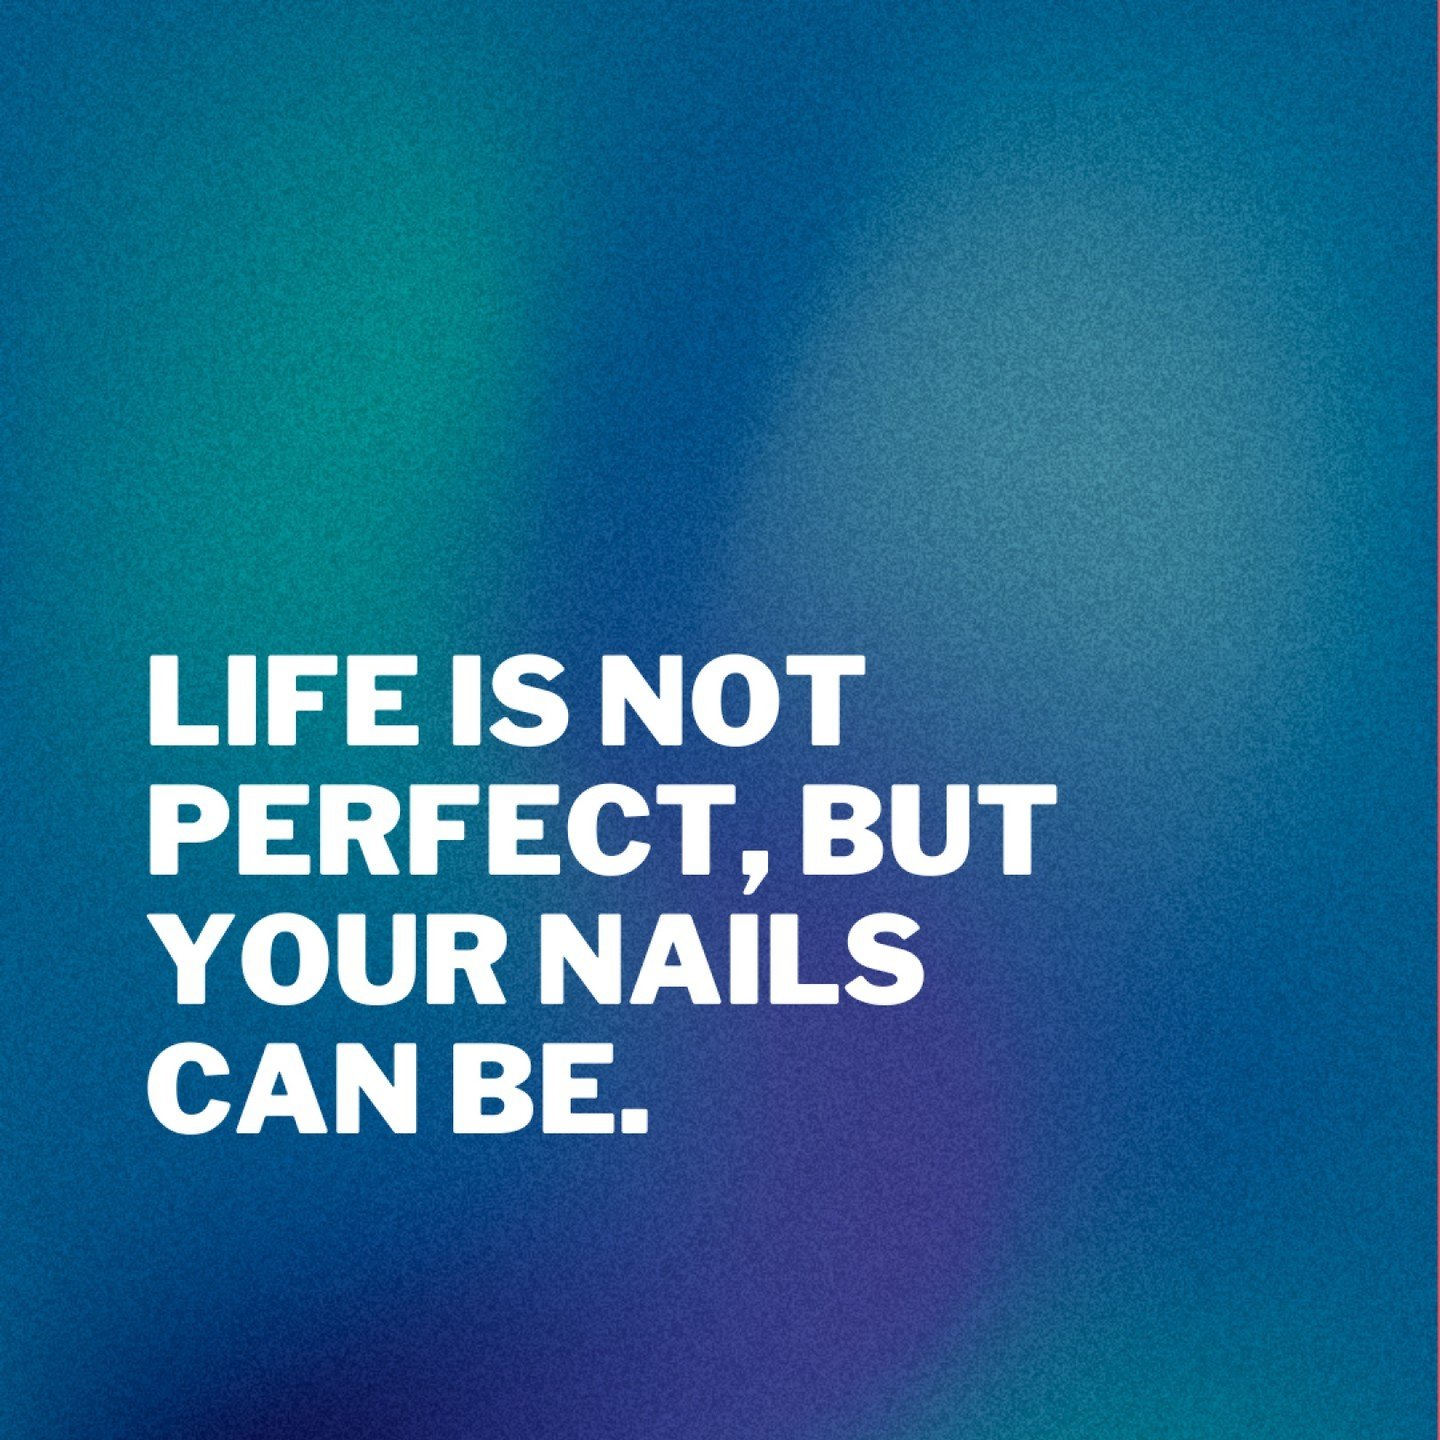 💖 Get Selfish with Us! 💖

Let's master the art of putting yourself first, starting with your nails. Life may have its ups and downs, but your nails can always be on point.💗
Join us for tiny nail masterpieces, whether you prefer a chic nude or play